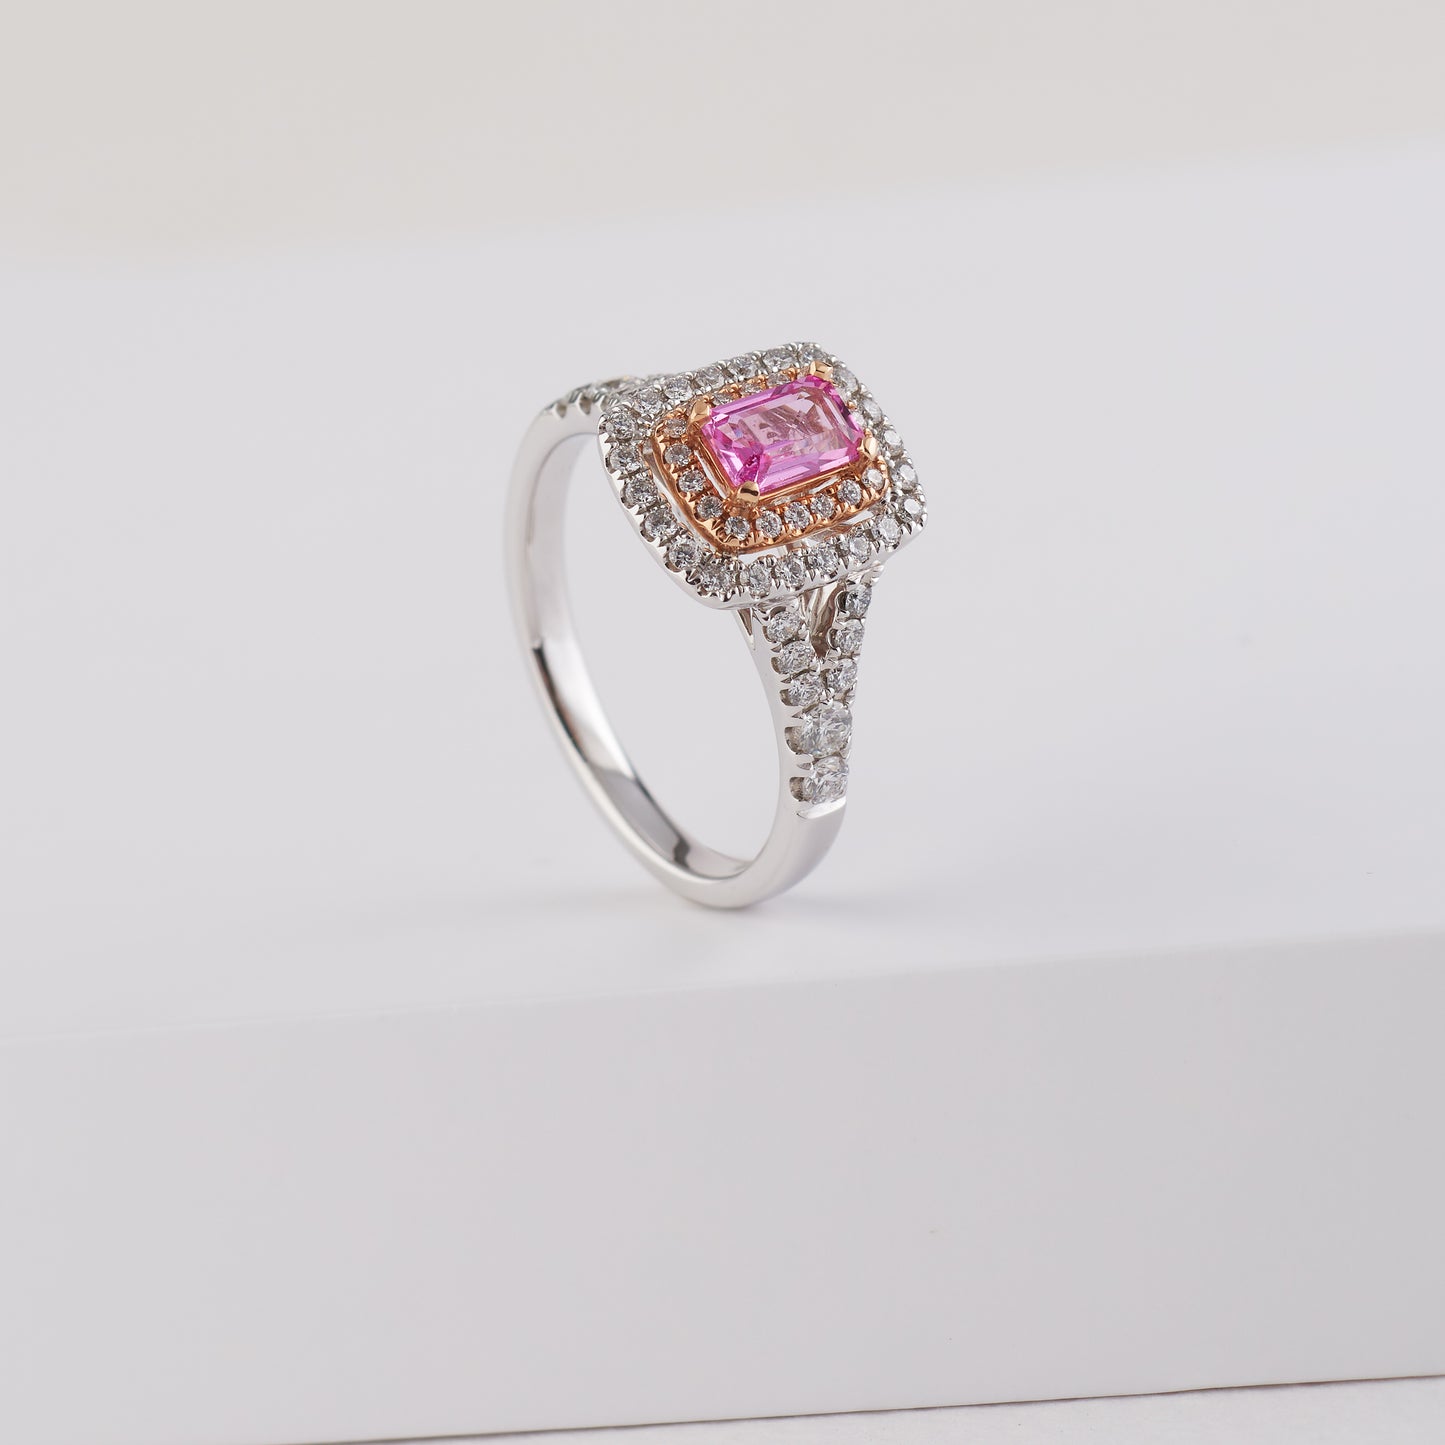 18K White and Rose Gold 6mm x 4mm Emerald Cut Pink Sapphire and Diamond Halo Ring.